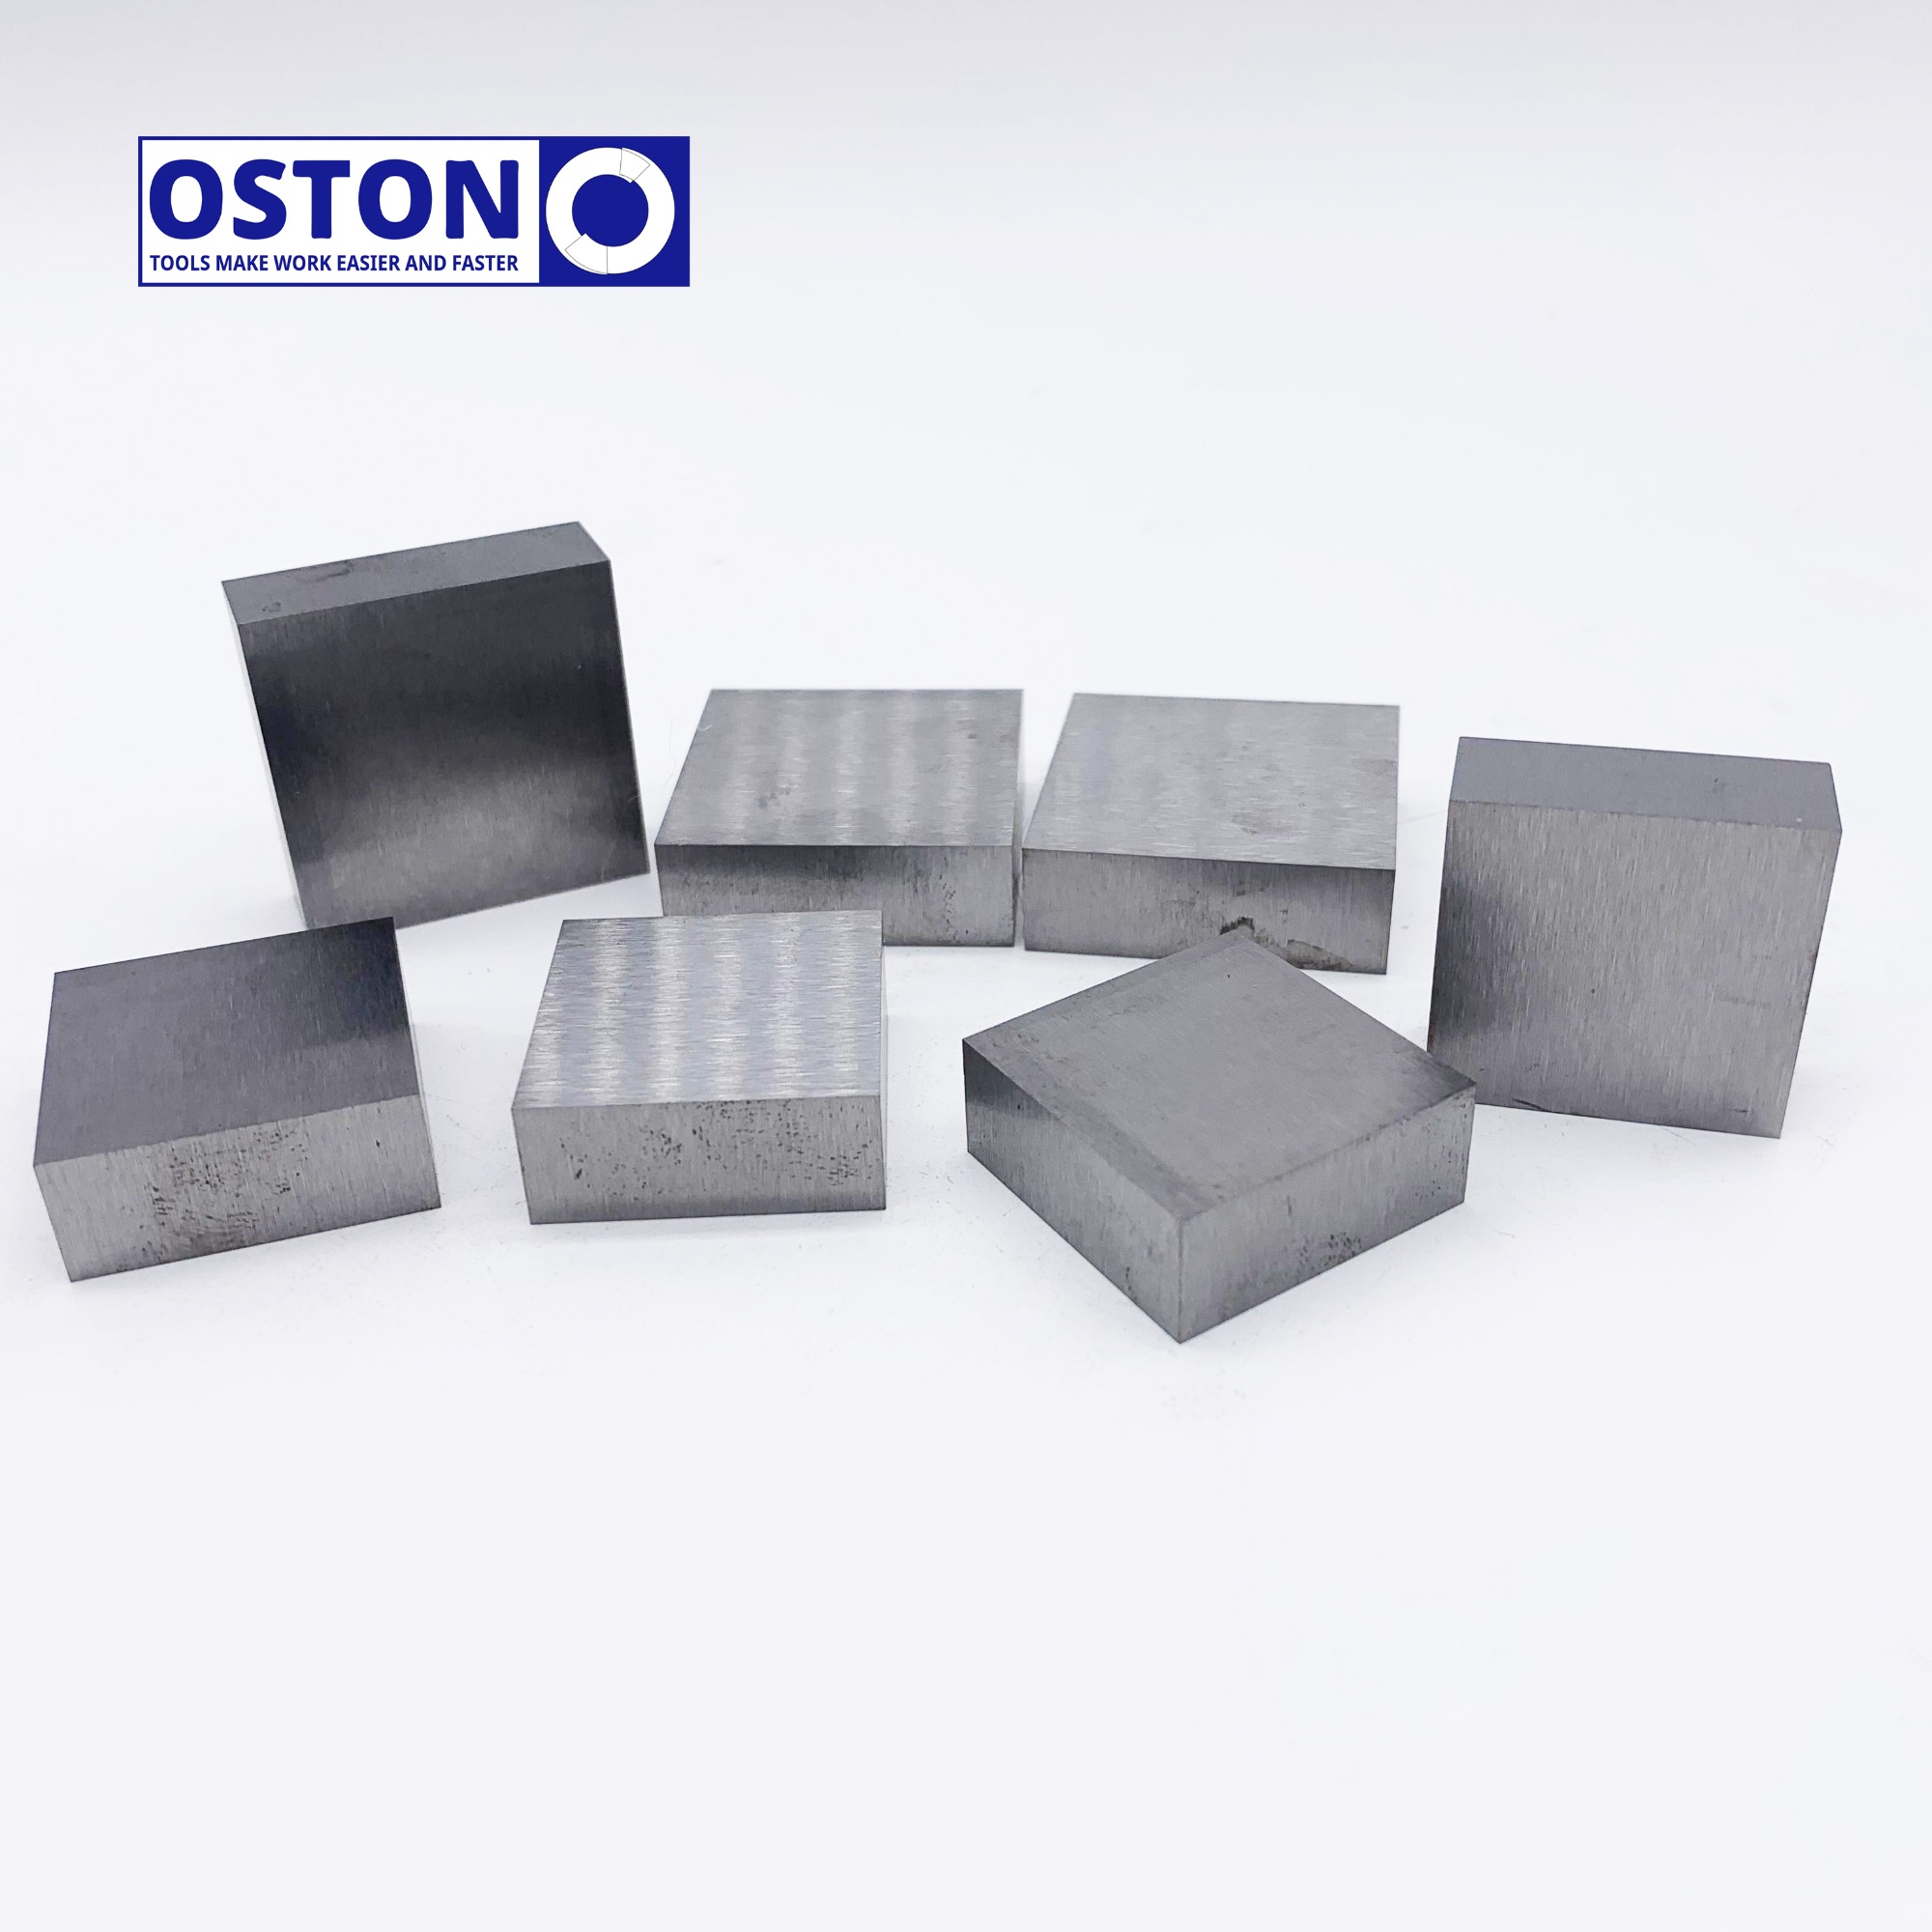 Tungsten Carbide Die Blanks for Card Clothing Works